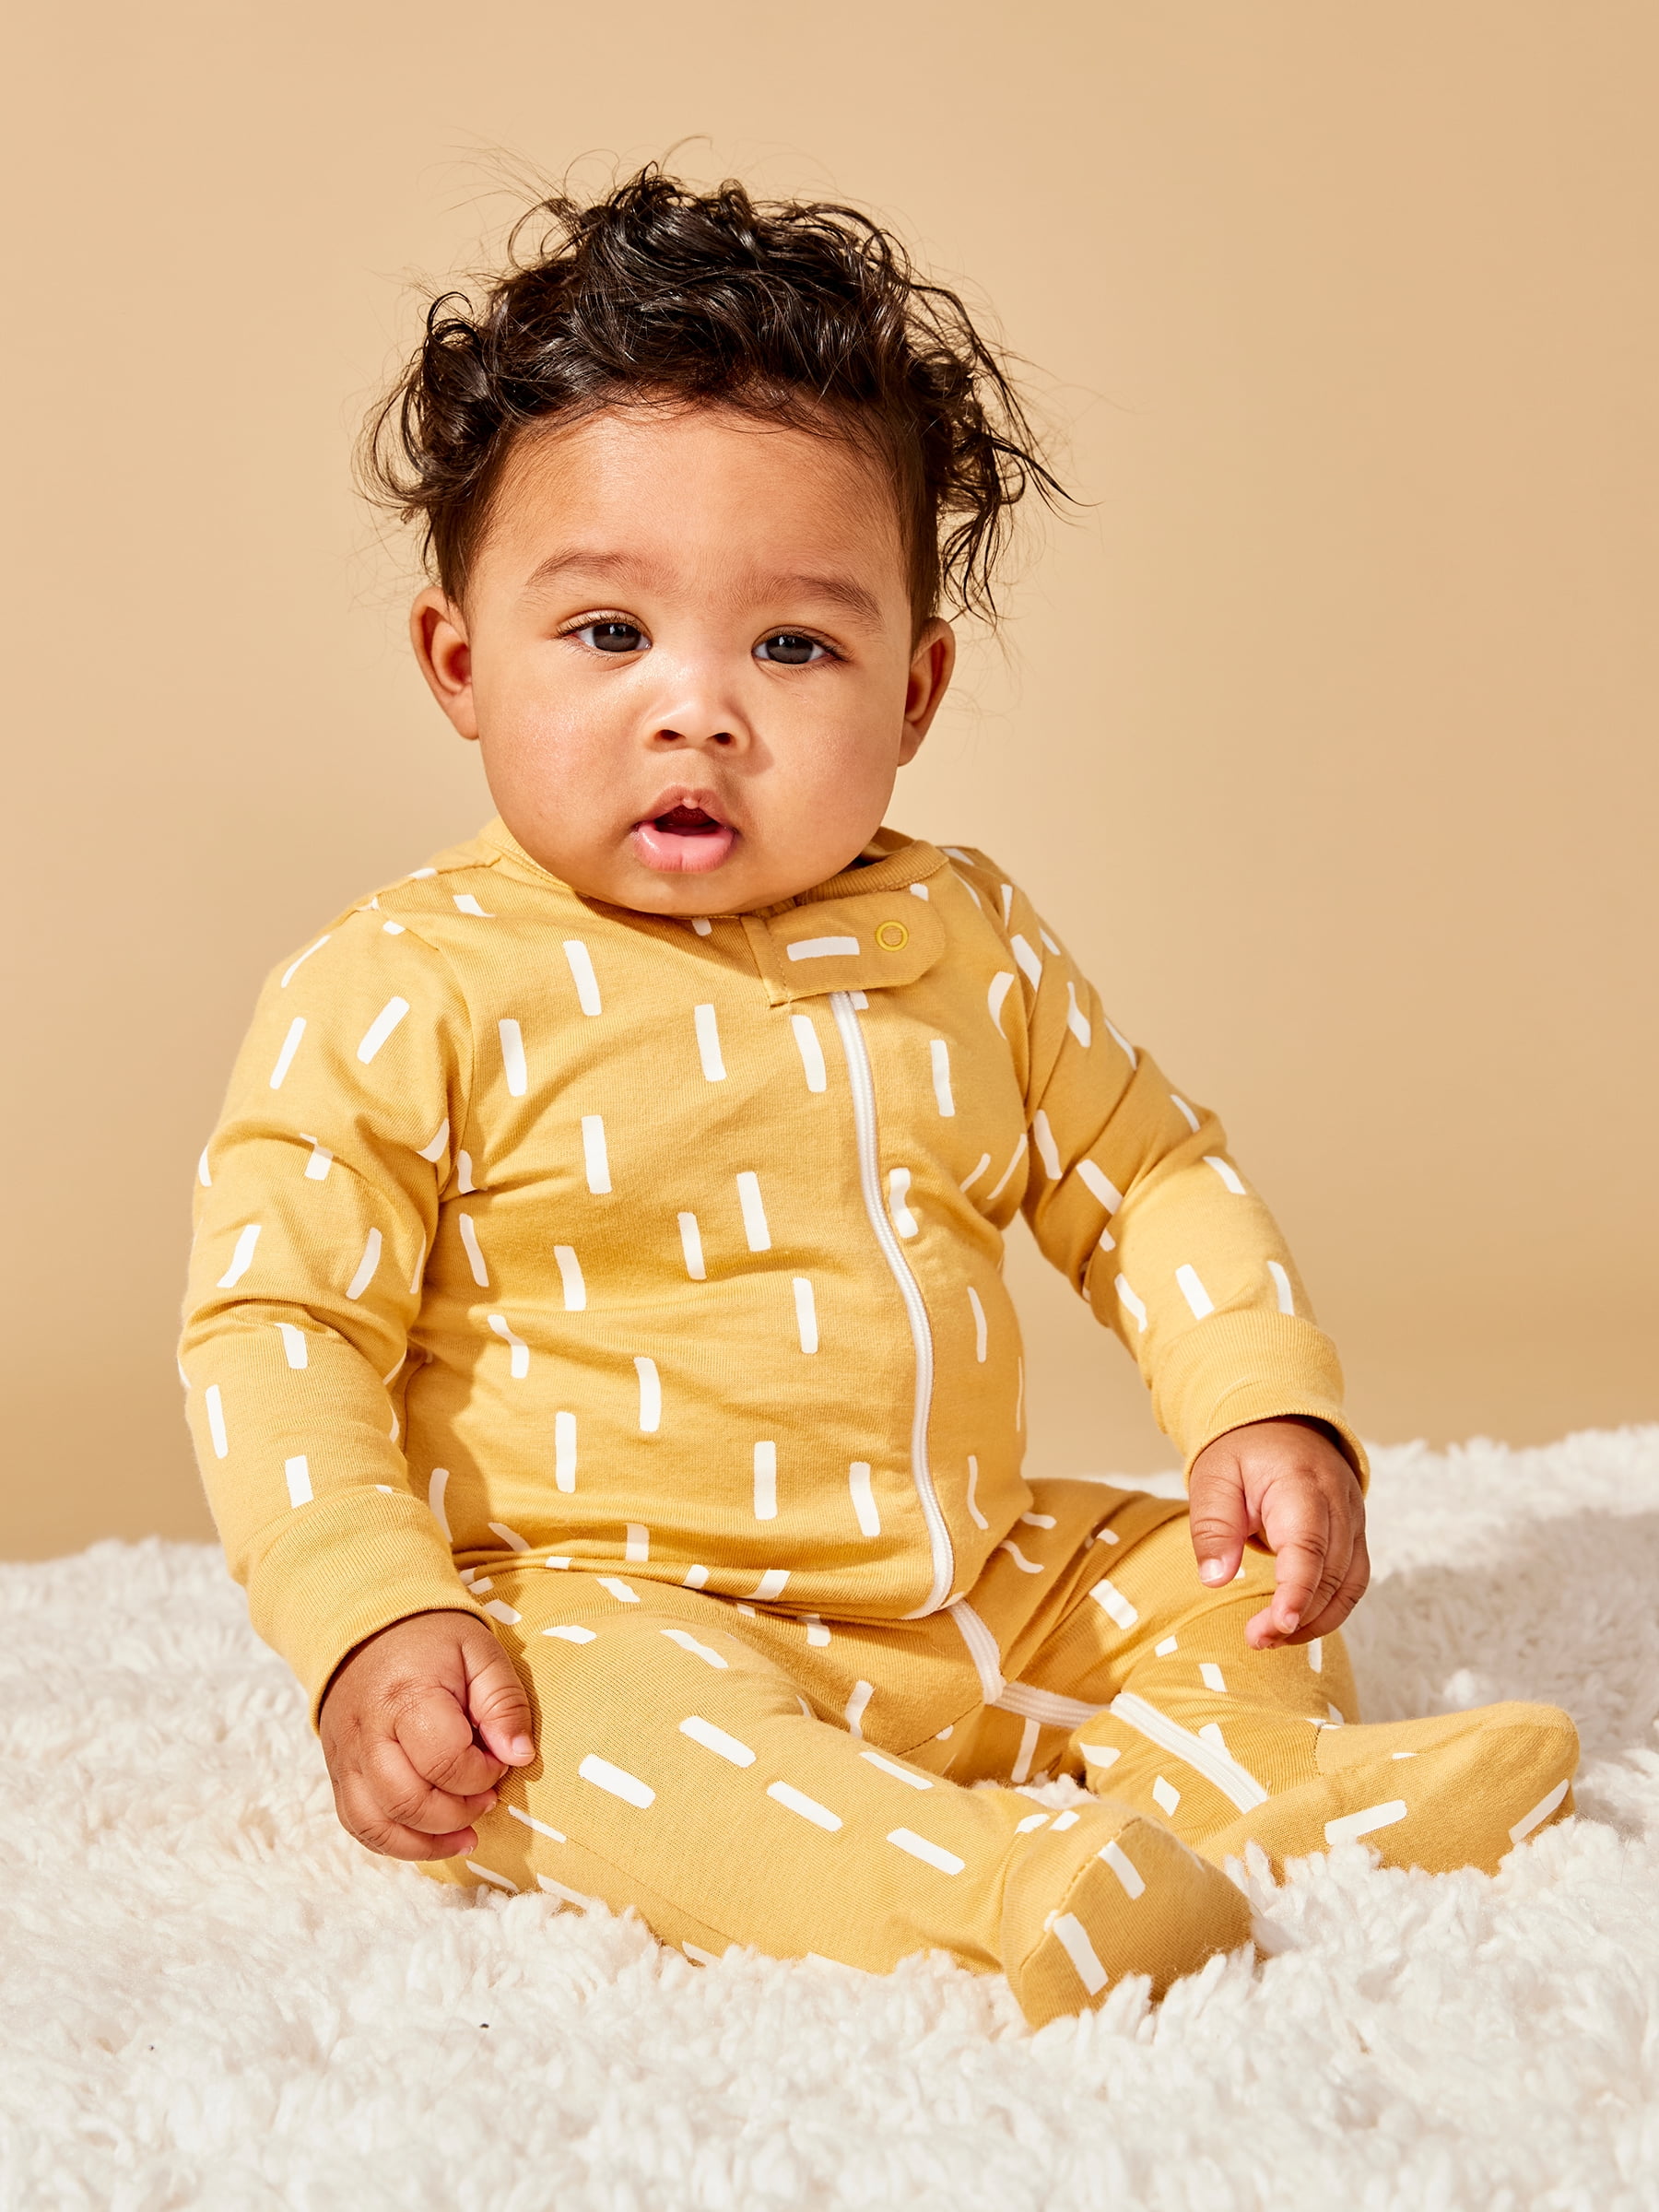 Newborn to 12 Months The Peanutshell Soft Footie Pajamas Baby Sleeper and Bodysuit for Baby Boys and Girls 